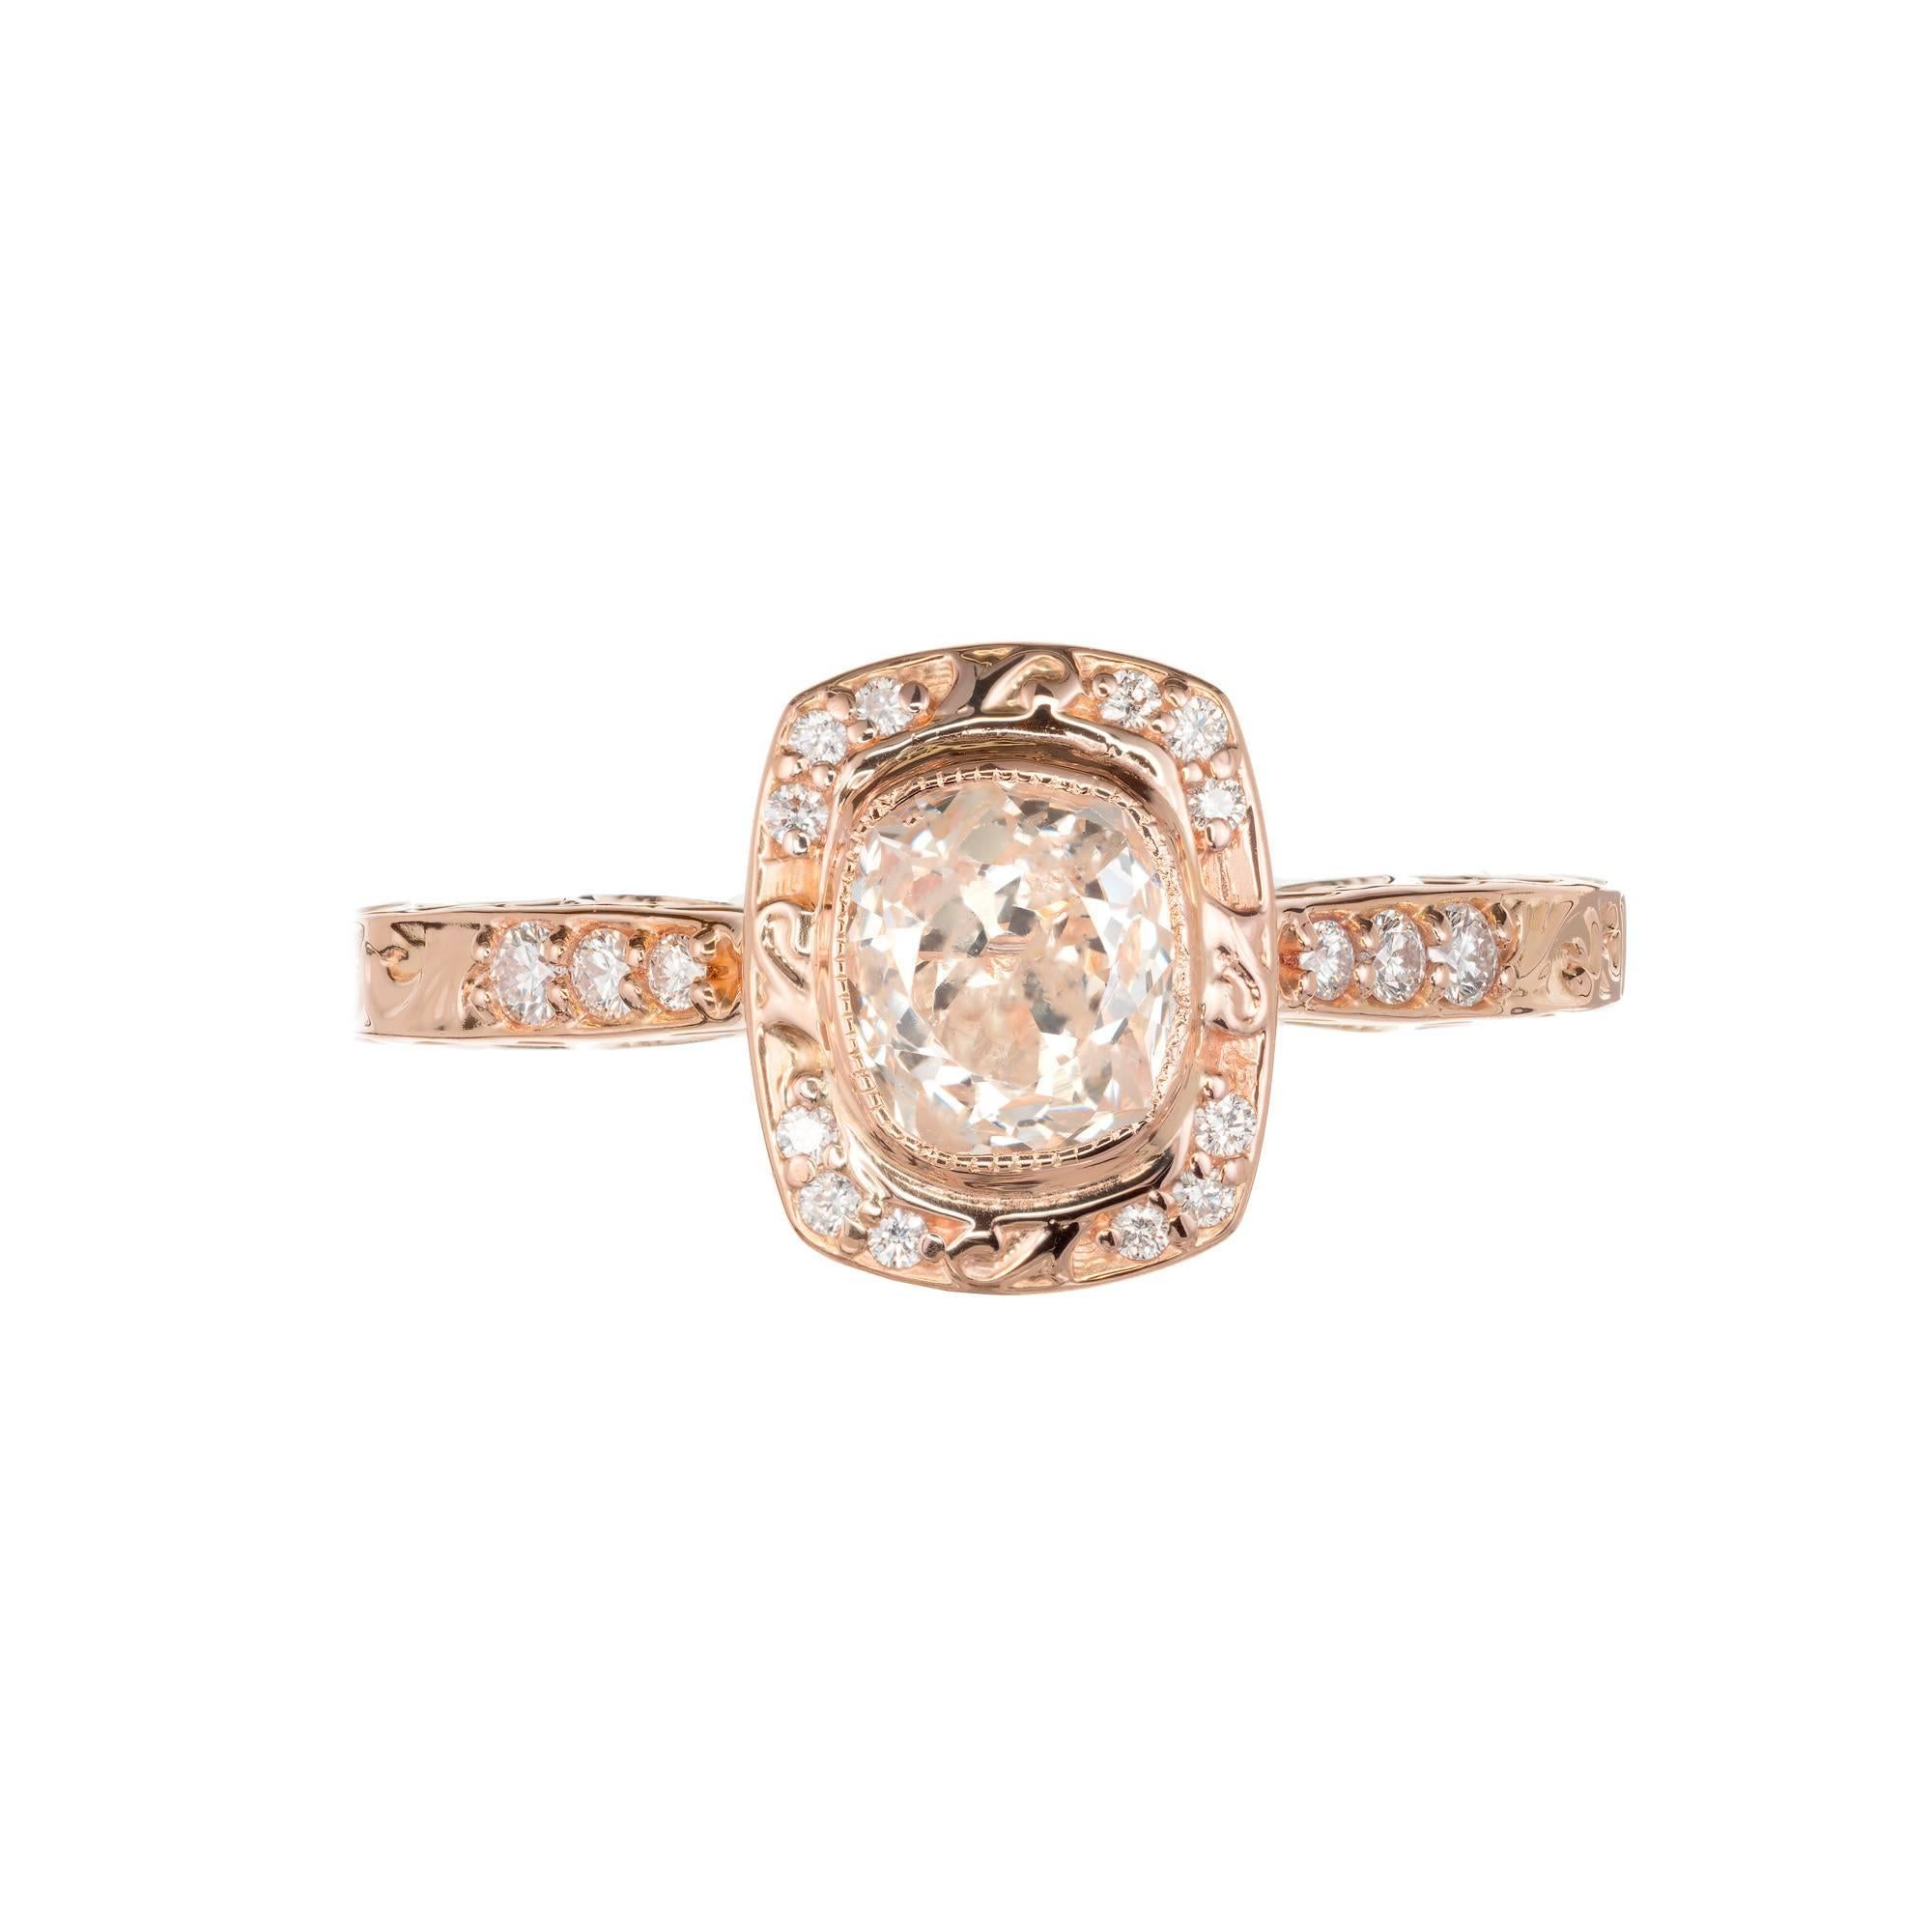 Peter Suchy scroll cushion bezel set simple halo diamond engagement ring. Scroll shoulders and sides. 18k rose gold setting which a wedding band can sit flush to the ring. The stone is from the late 1800's, old mine brilliant cut cushion shape with